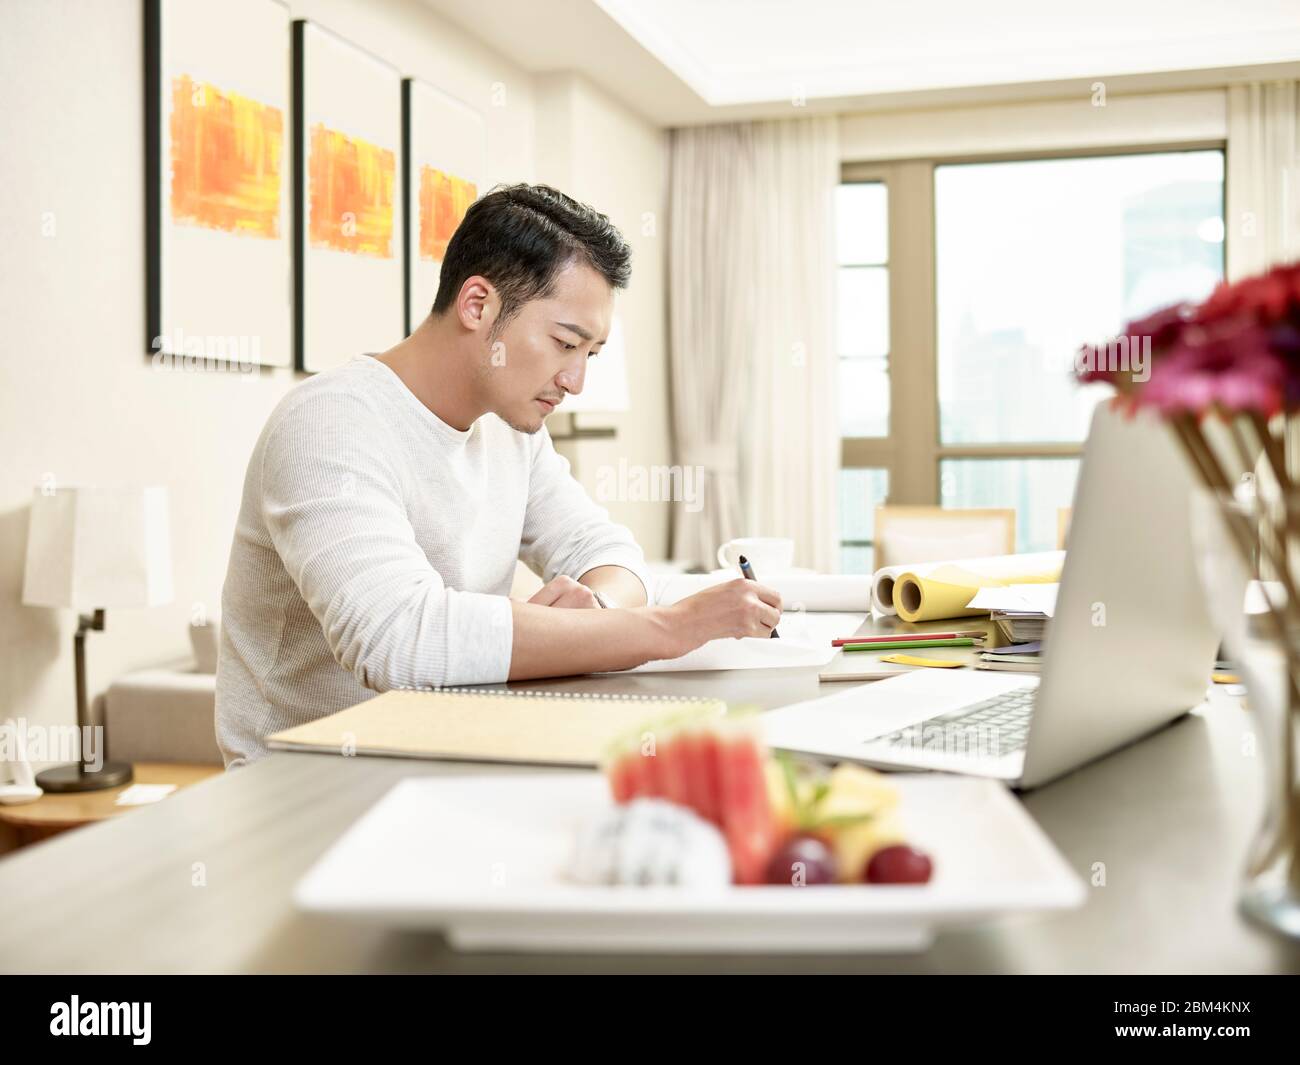 young asian man design professional working from home sitting at kitchen counter looking at a drawing (artwork in background digitally altered) Stock Photo